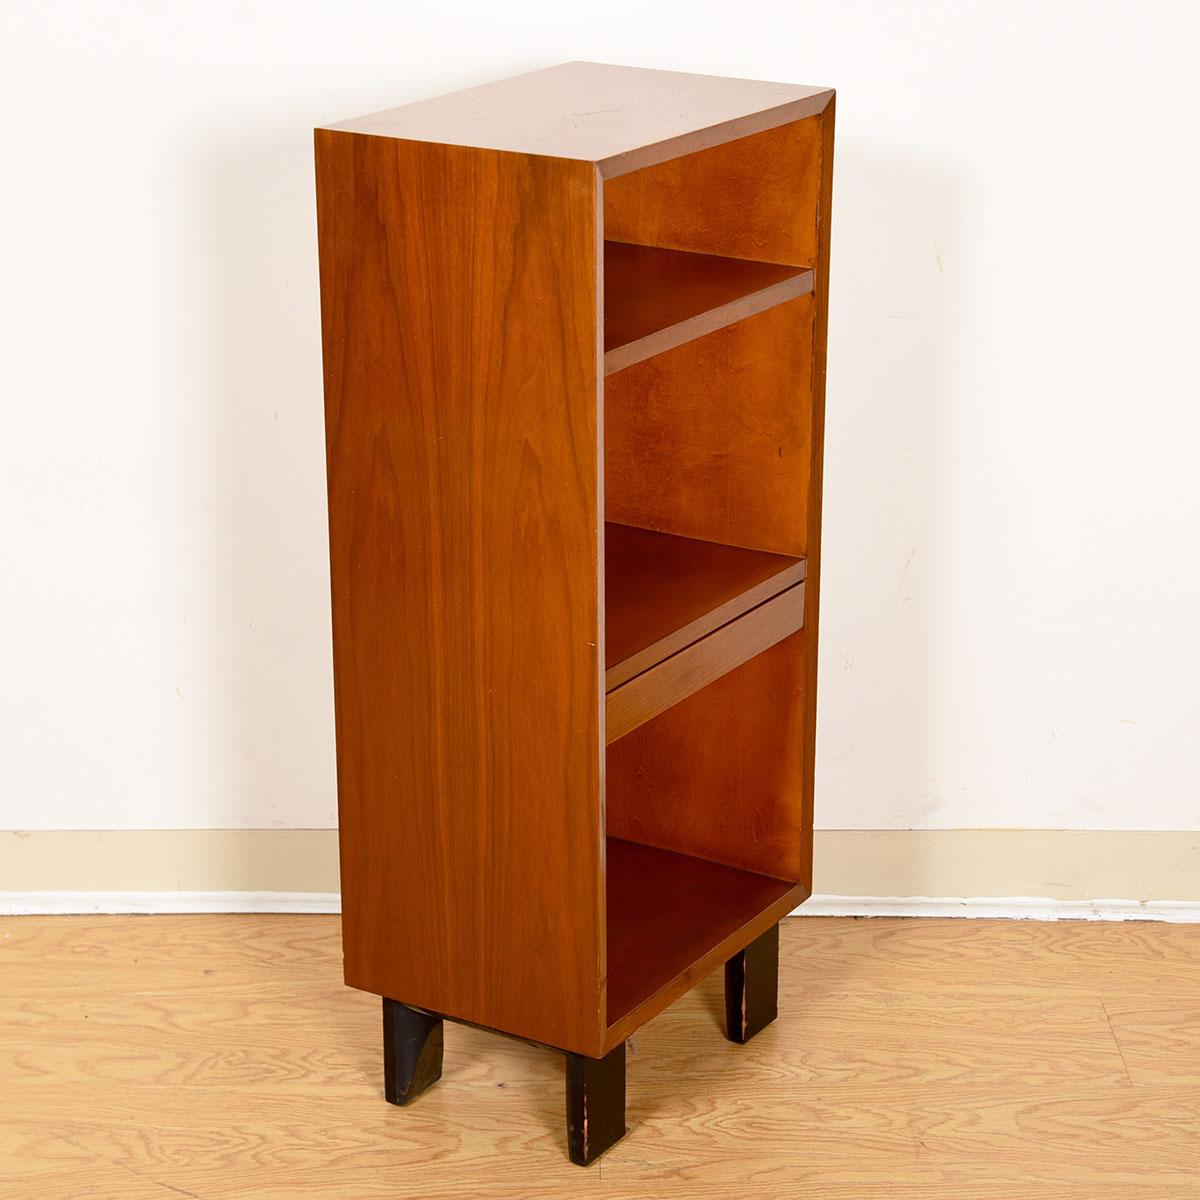 20th Century Pair of Mid-Century Modern Headboards & Nightstands by George Nelson For Sale